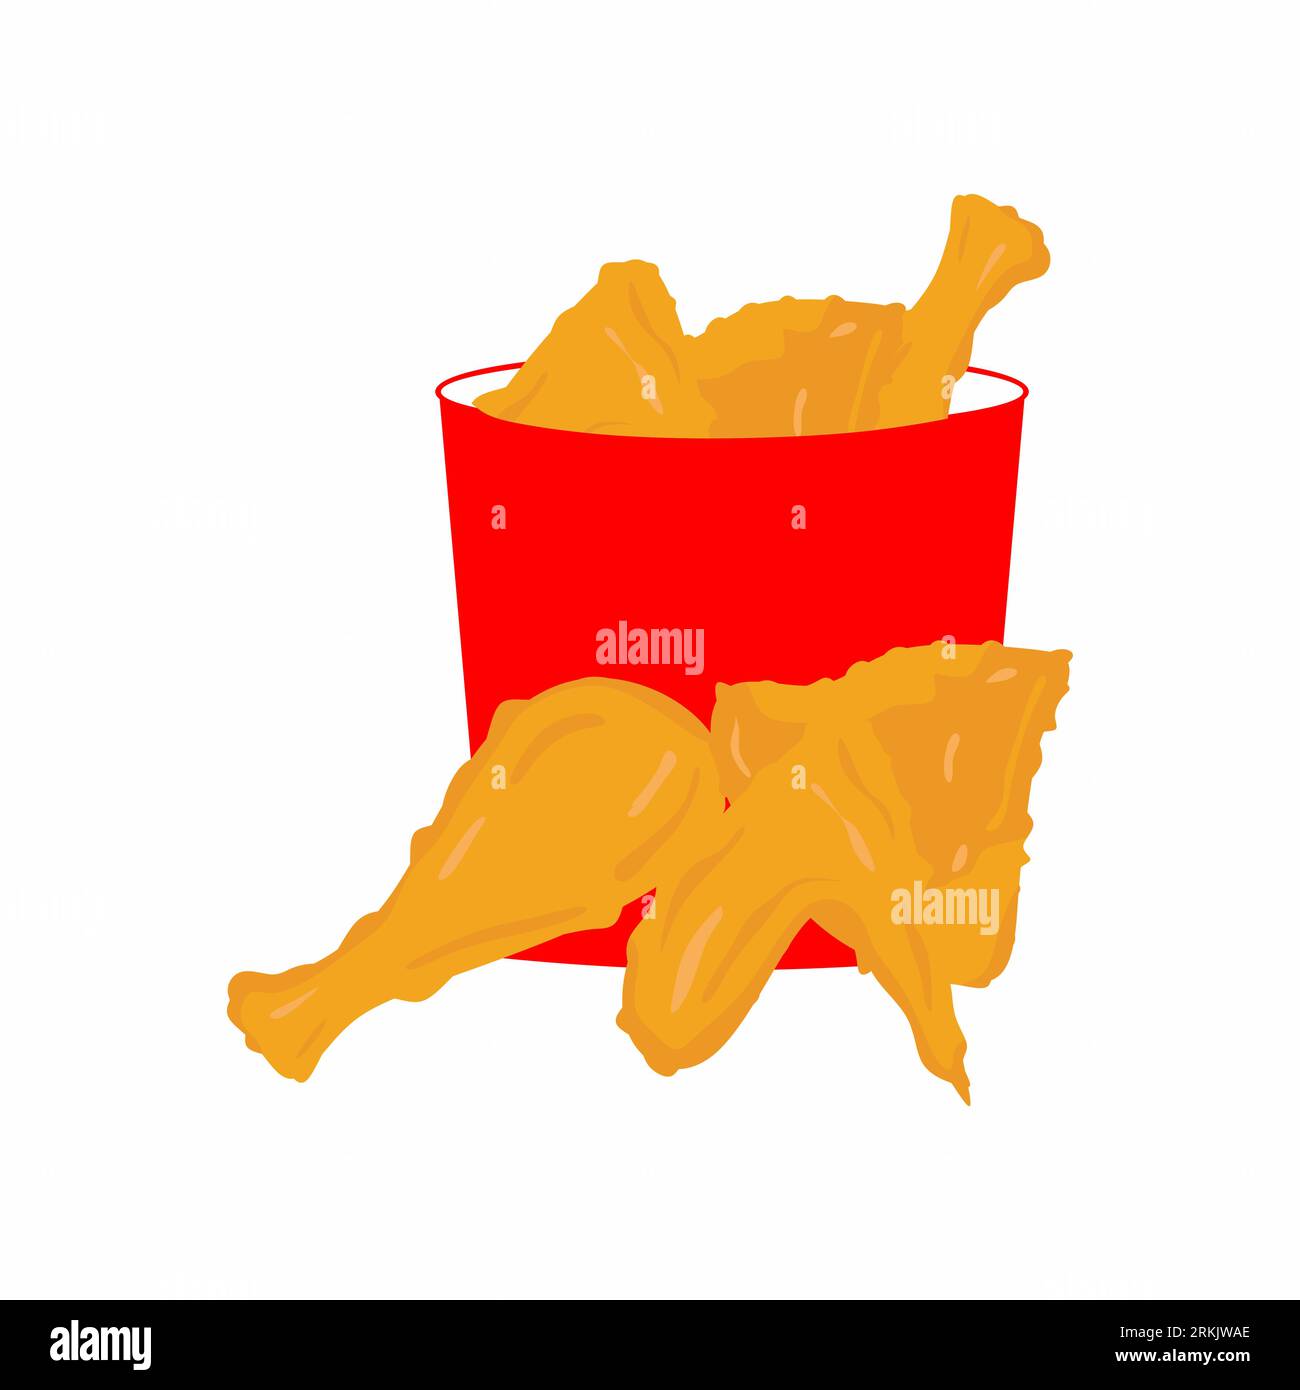 Vector drawing of fried chicken with red bucket in flat cartoon style. Fried junk food concept. Illustration for design fast food menu, poster, card, Stock Vector